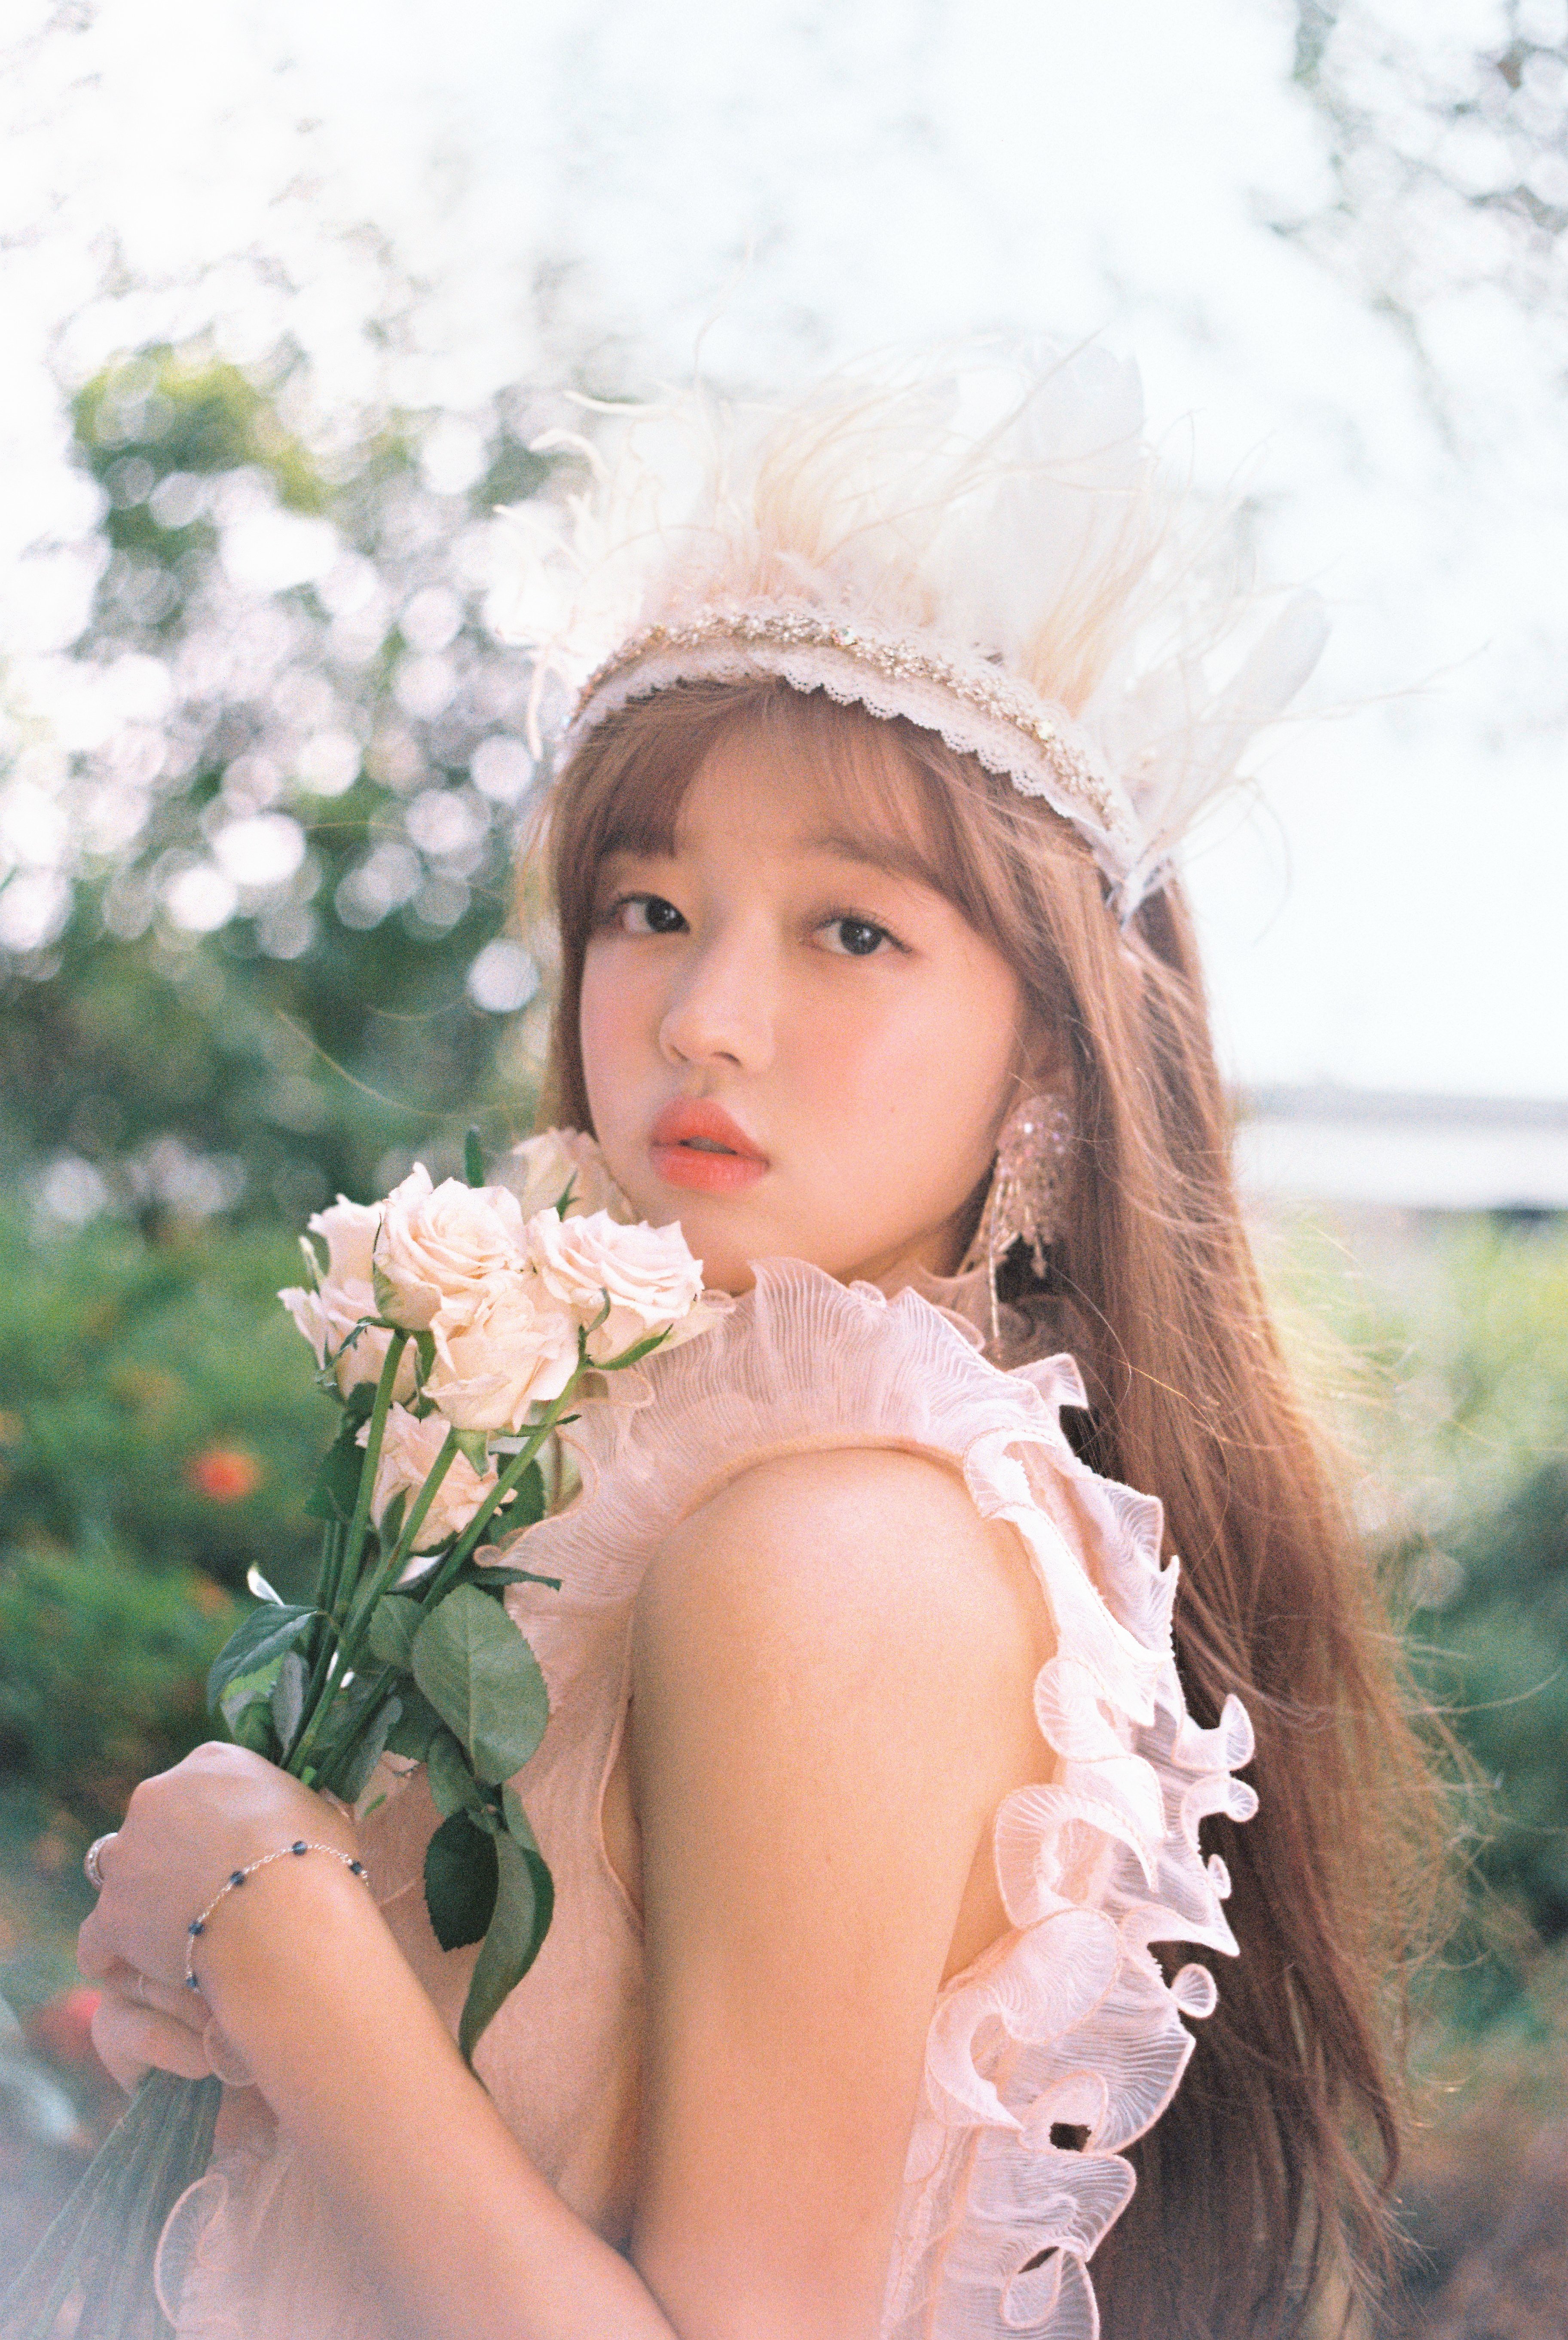 Oh My Girl - Remember Me Concept Photos (HD/HR) - K-Pop ...